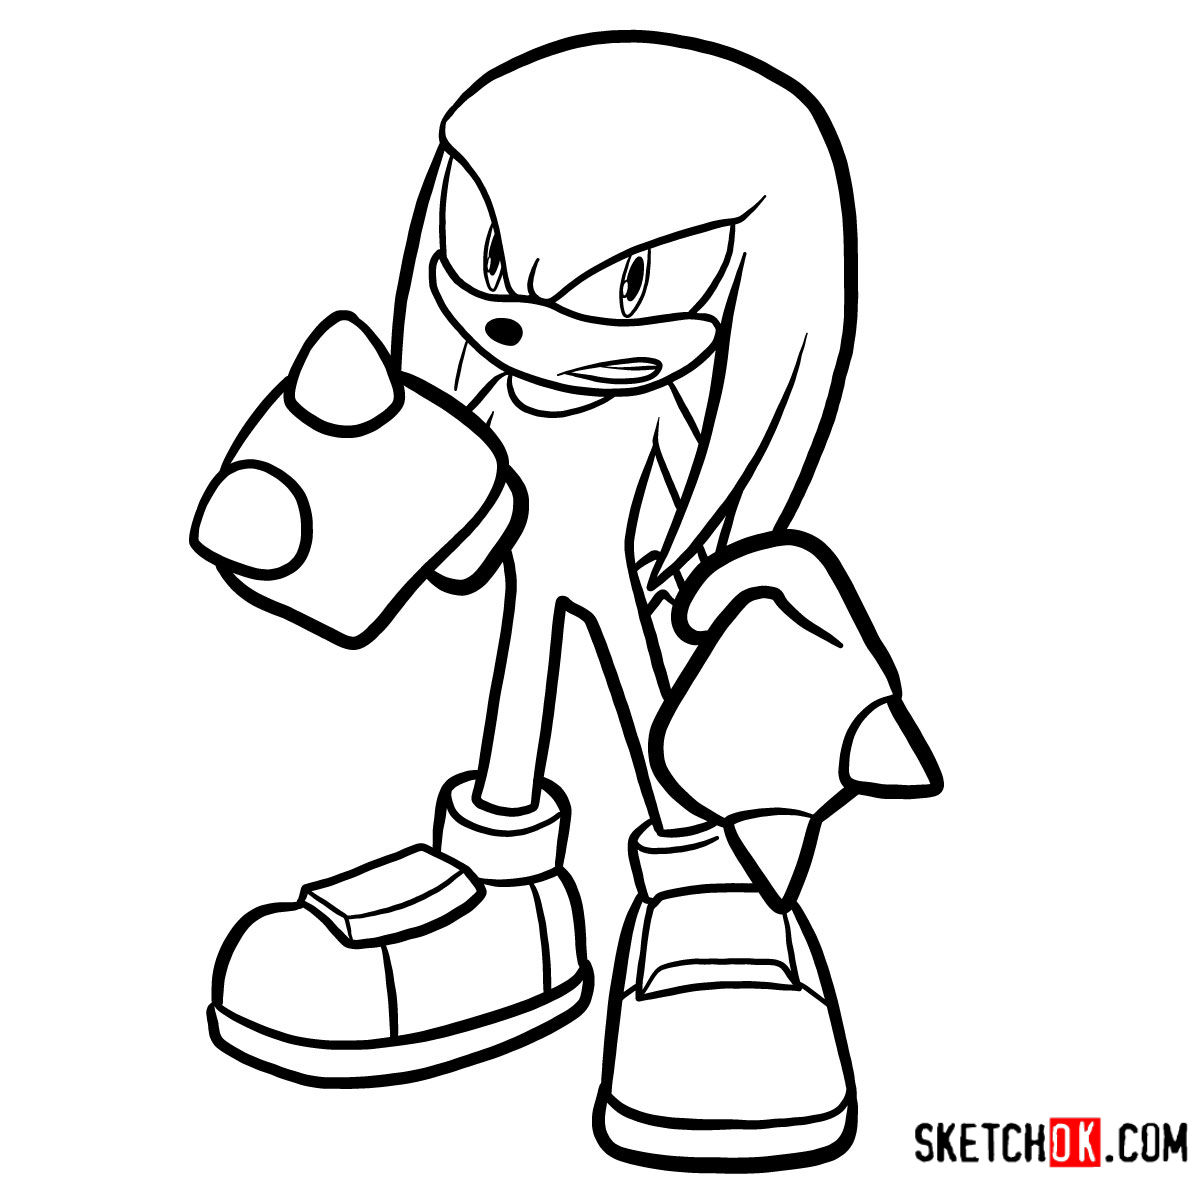 How to draw Knuckles the Echidna